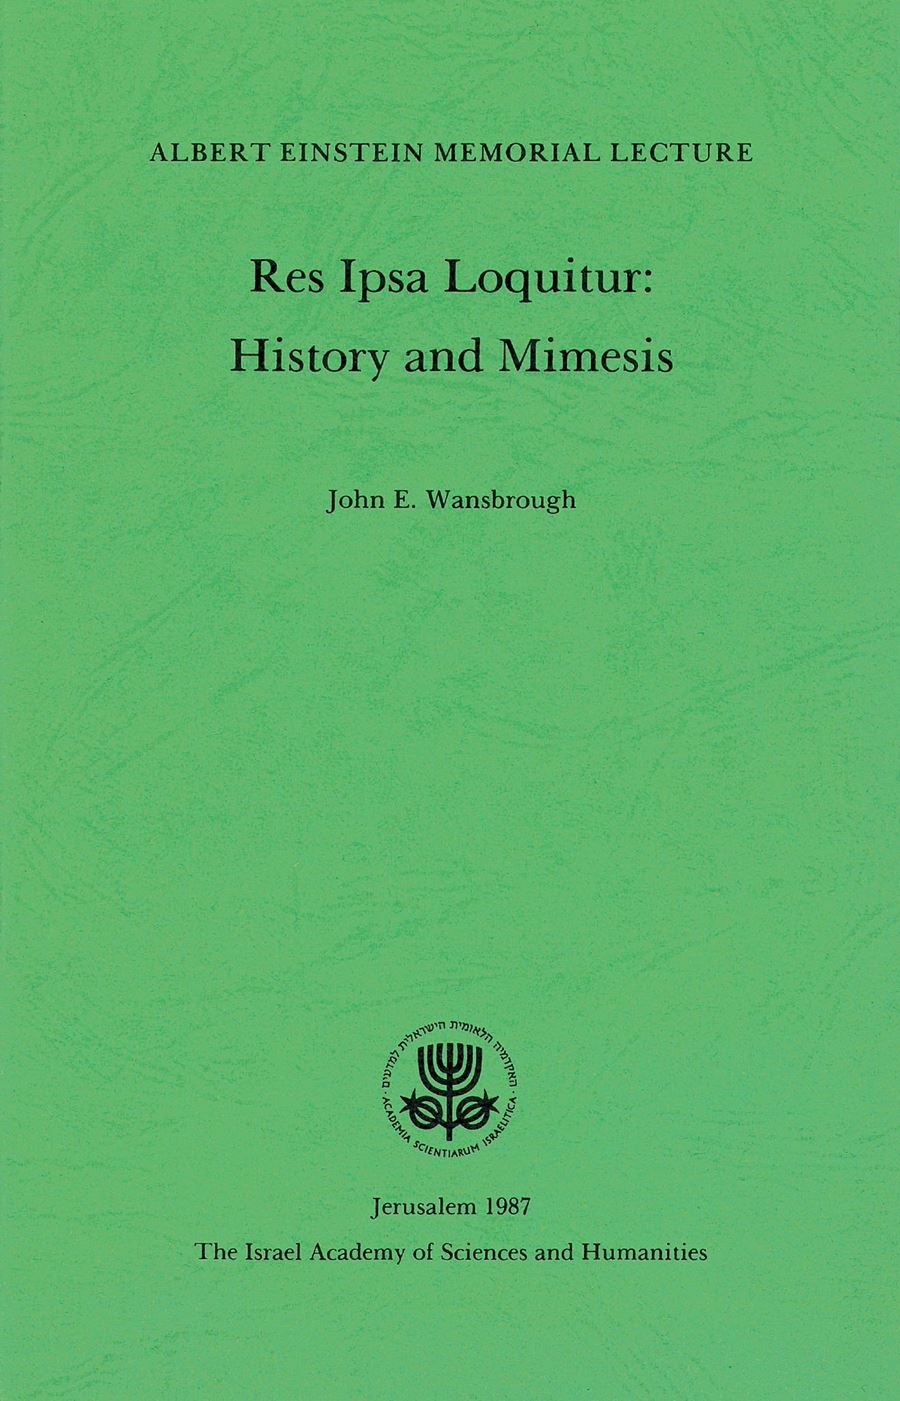 Res Ipsa Loquitur: History and Mimesis